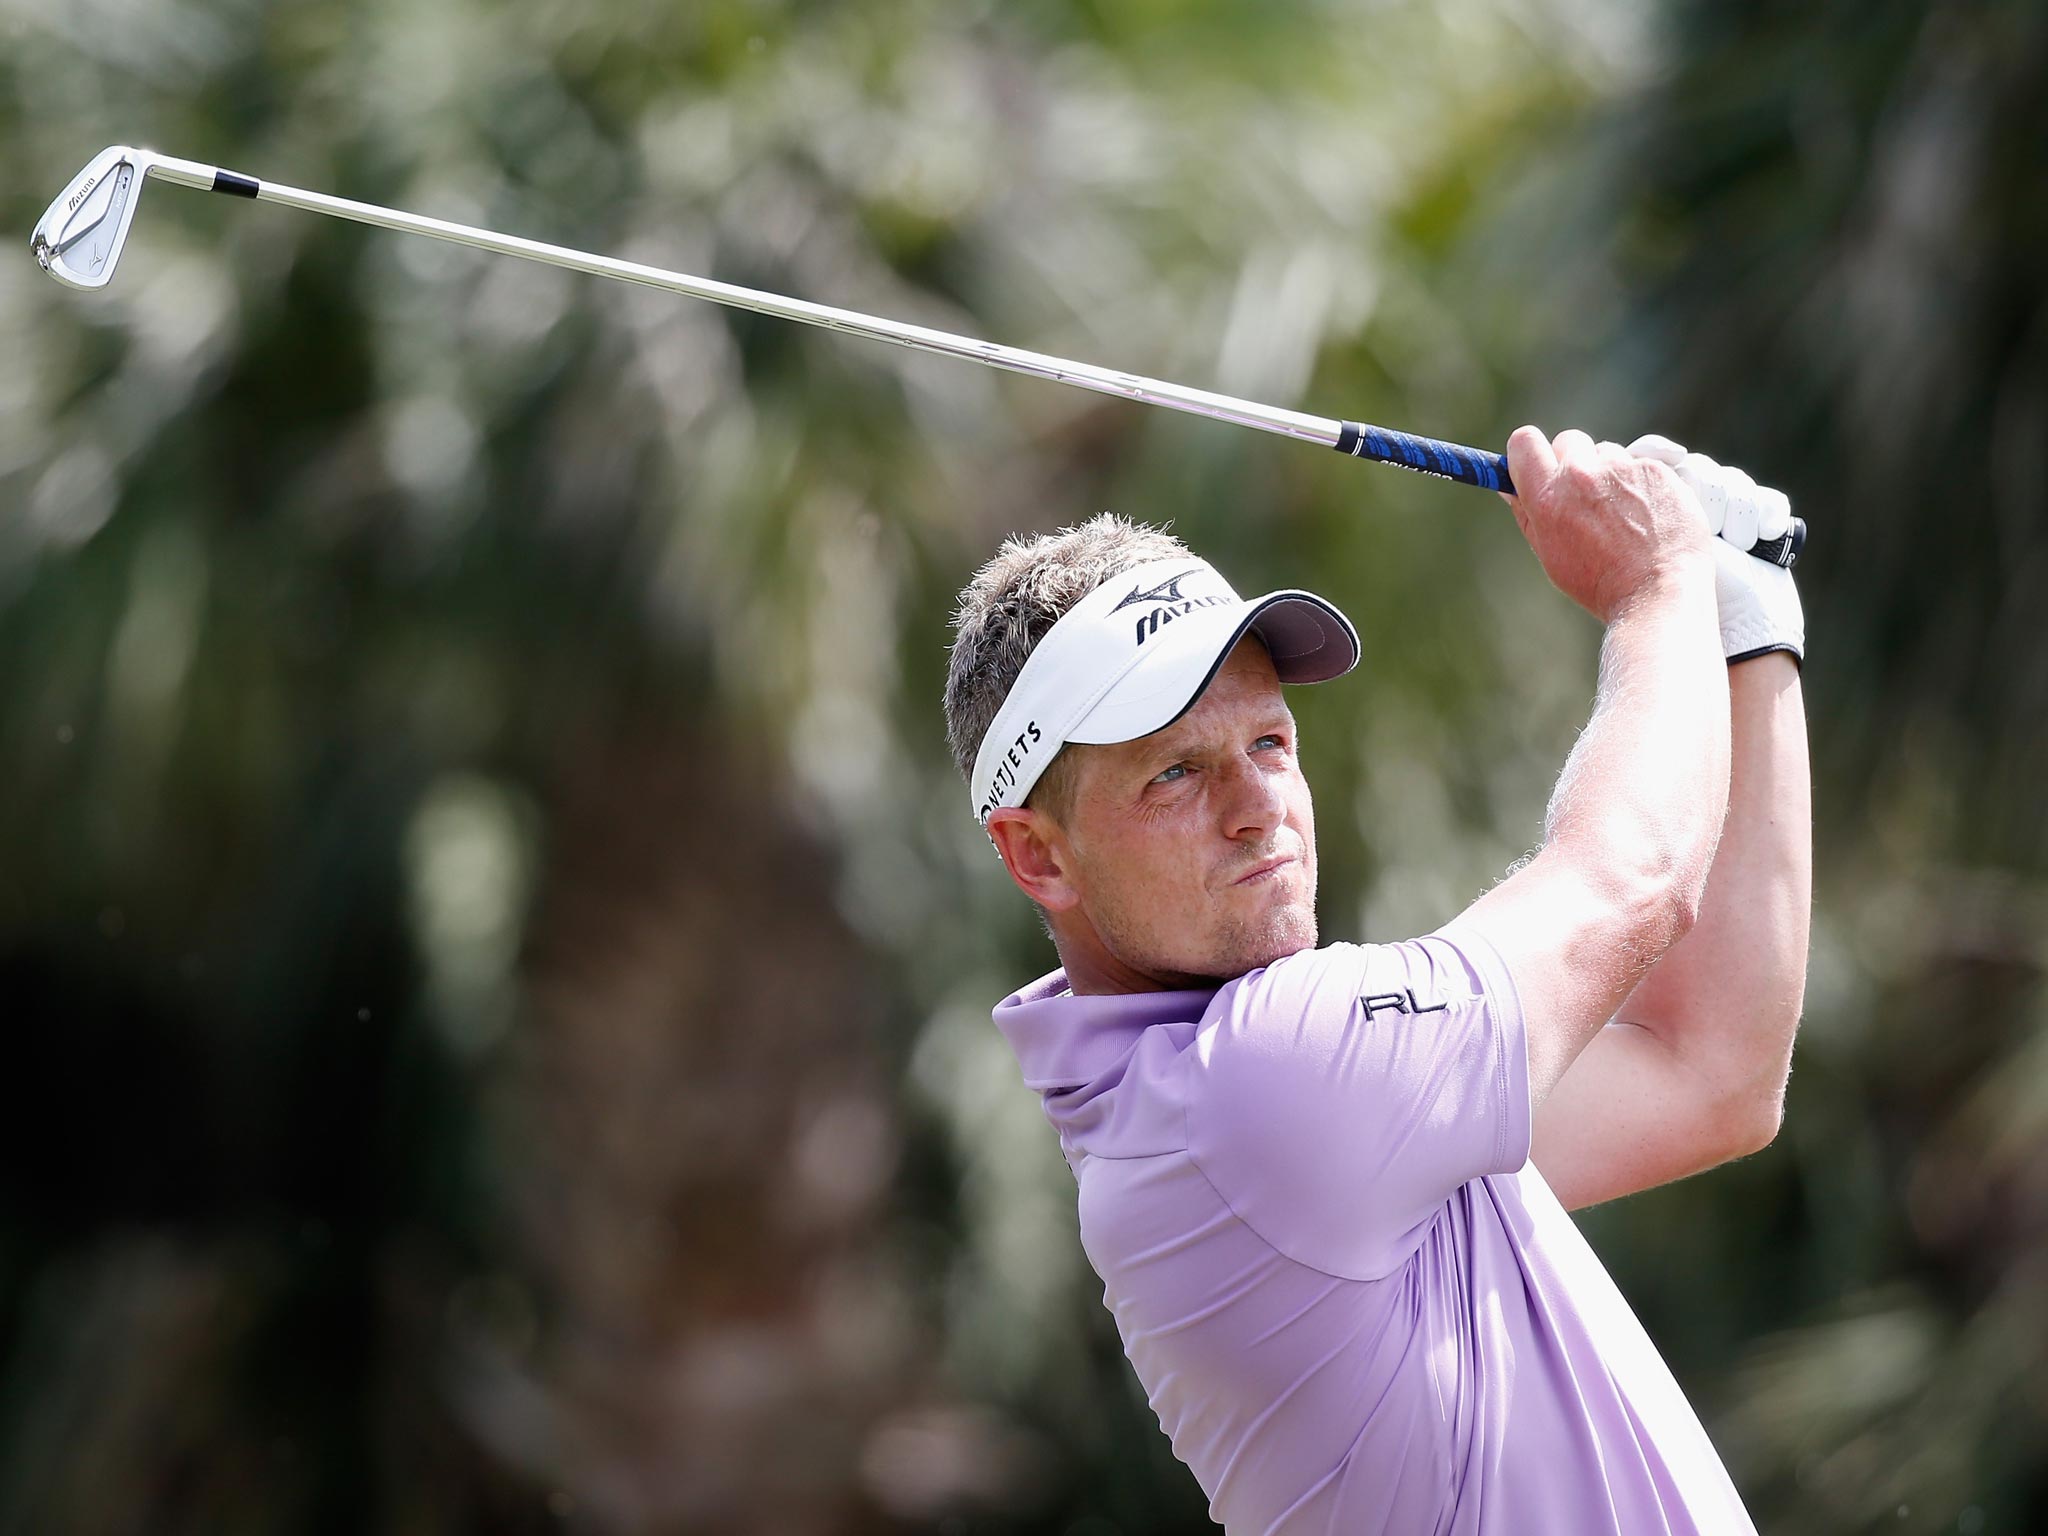 Luke Donald was not helped by the break for bad weather